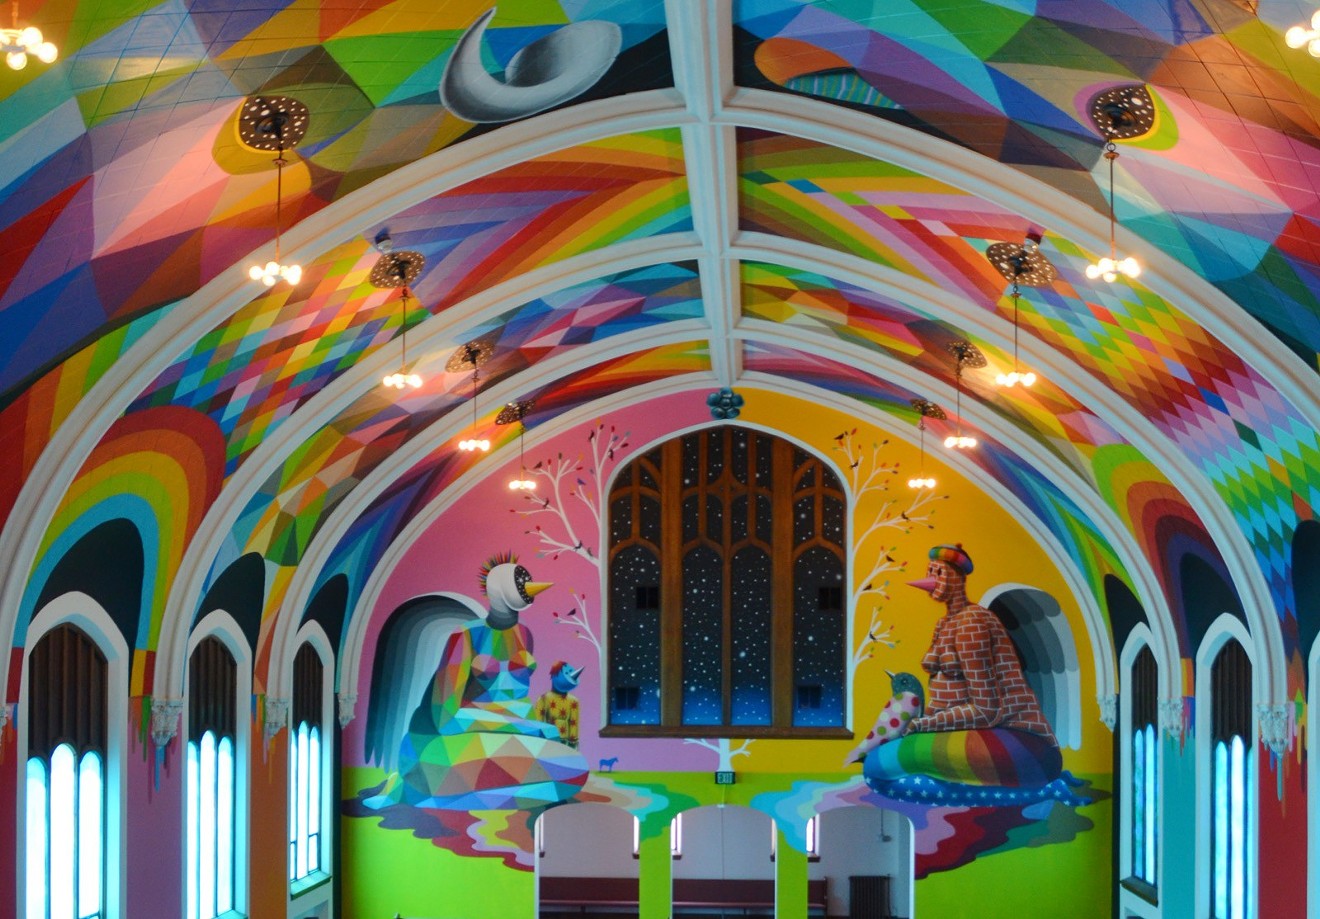 You could get married under this mural at the International Church of Cannabis.